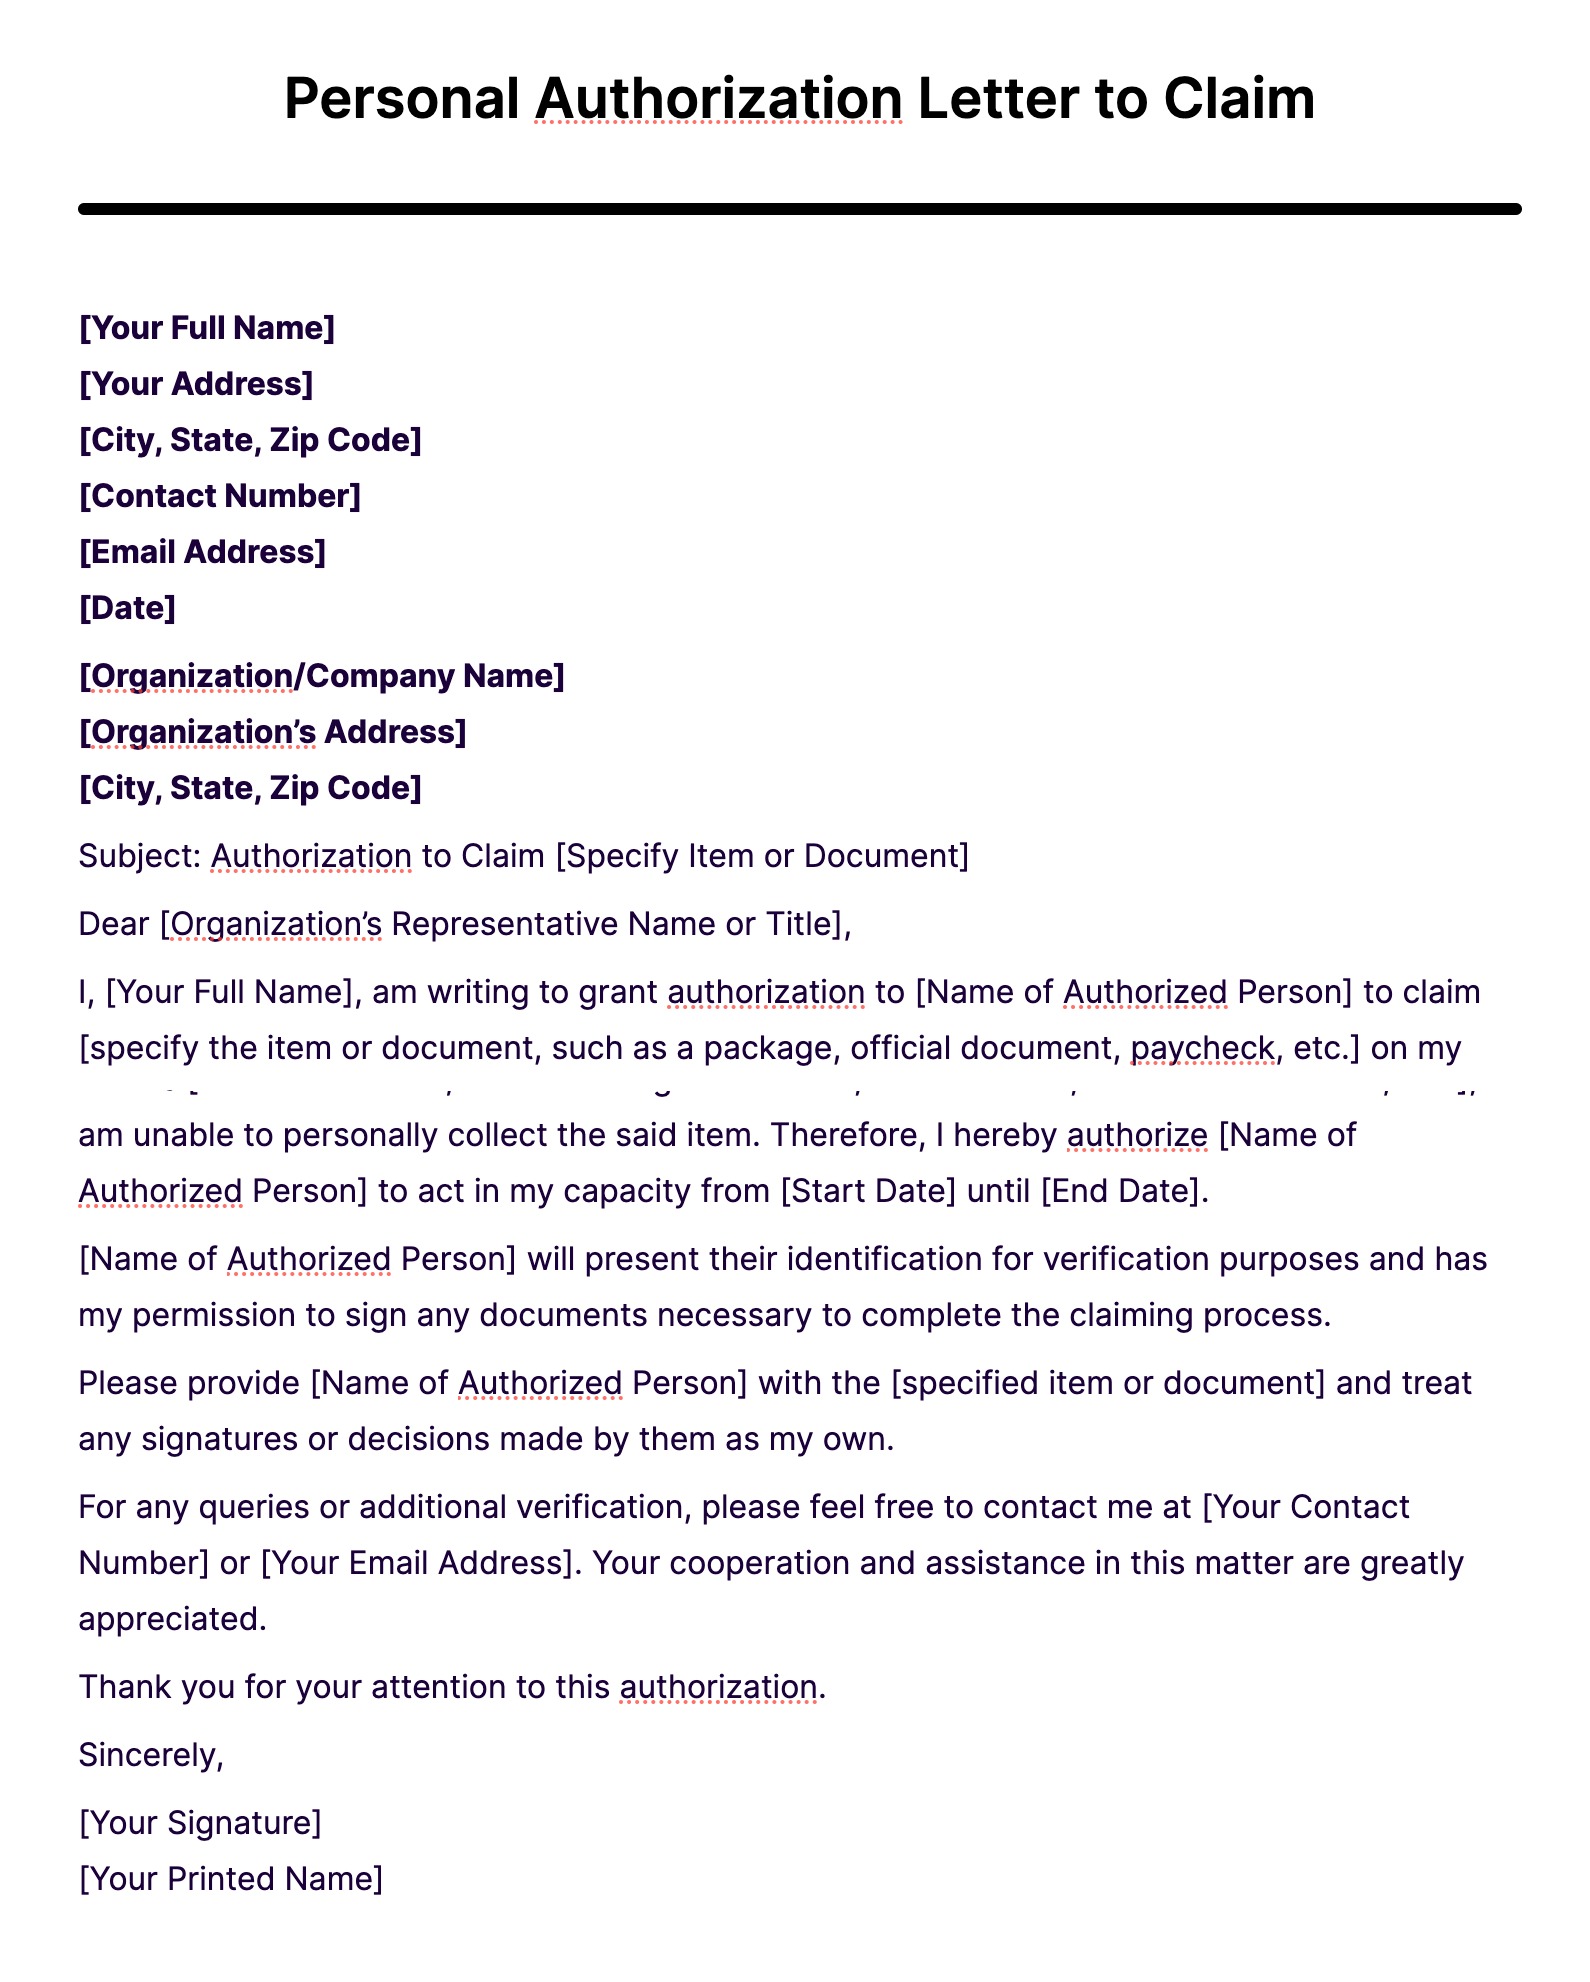 Personal Authorization Letter to Claim